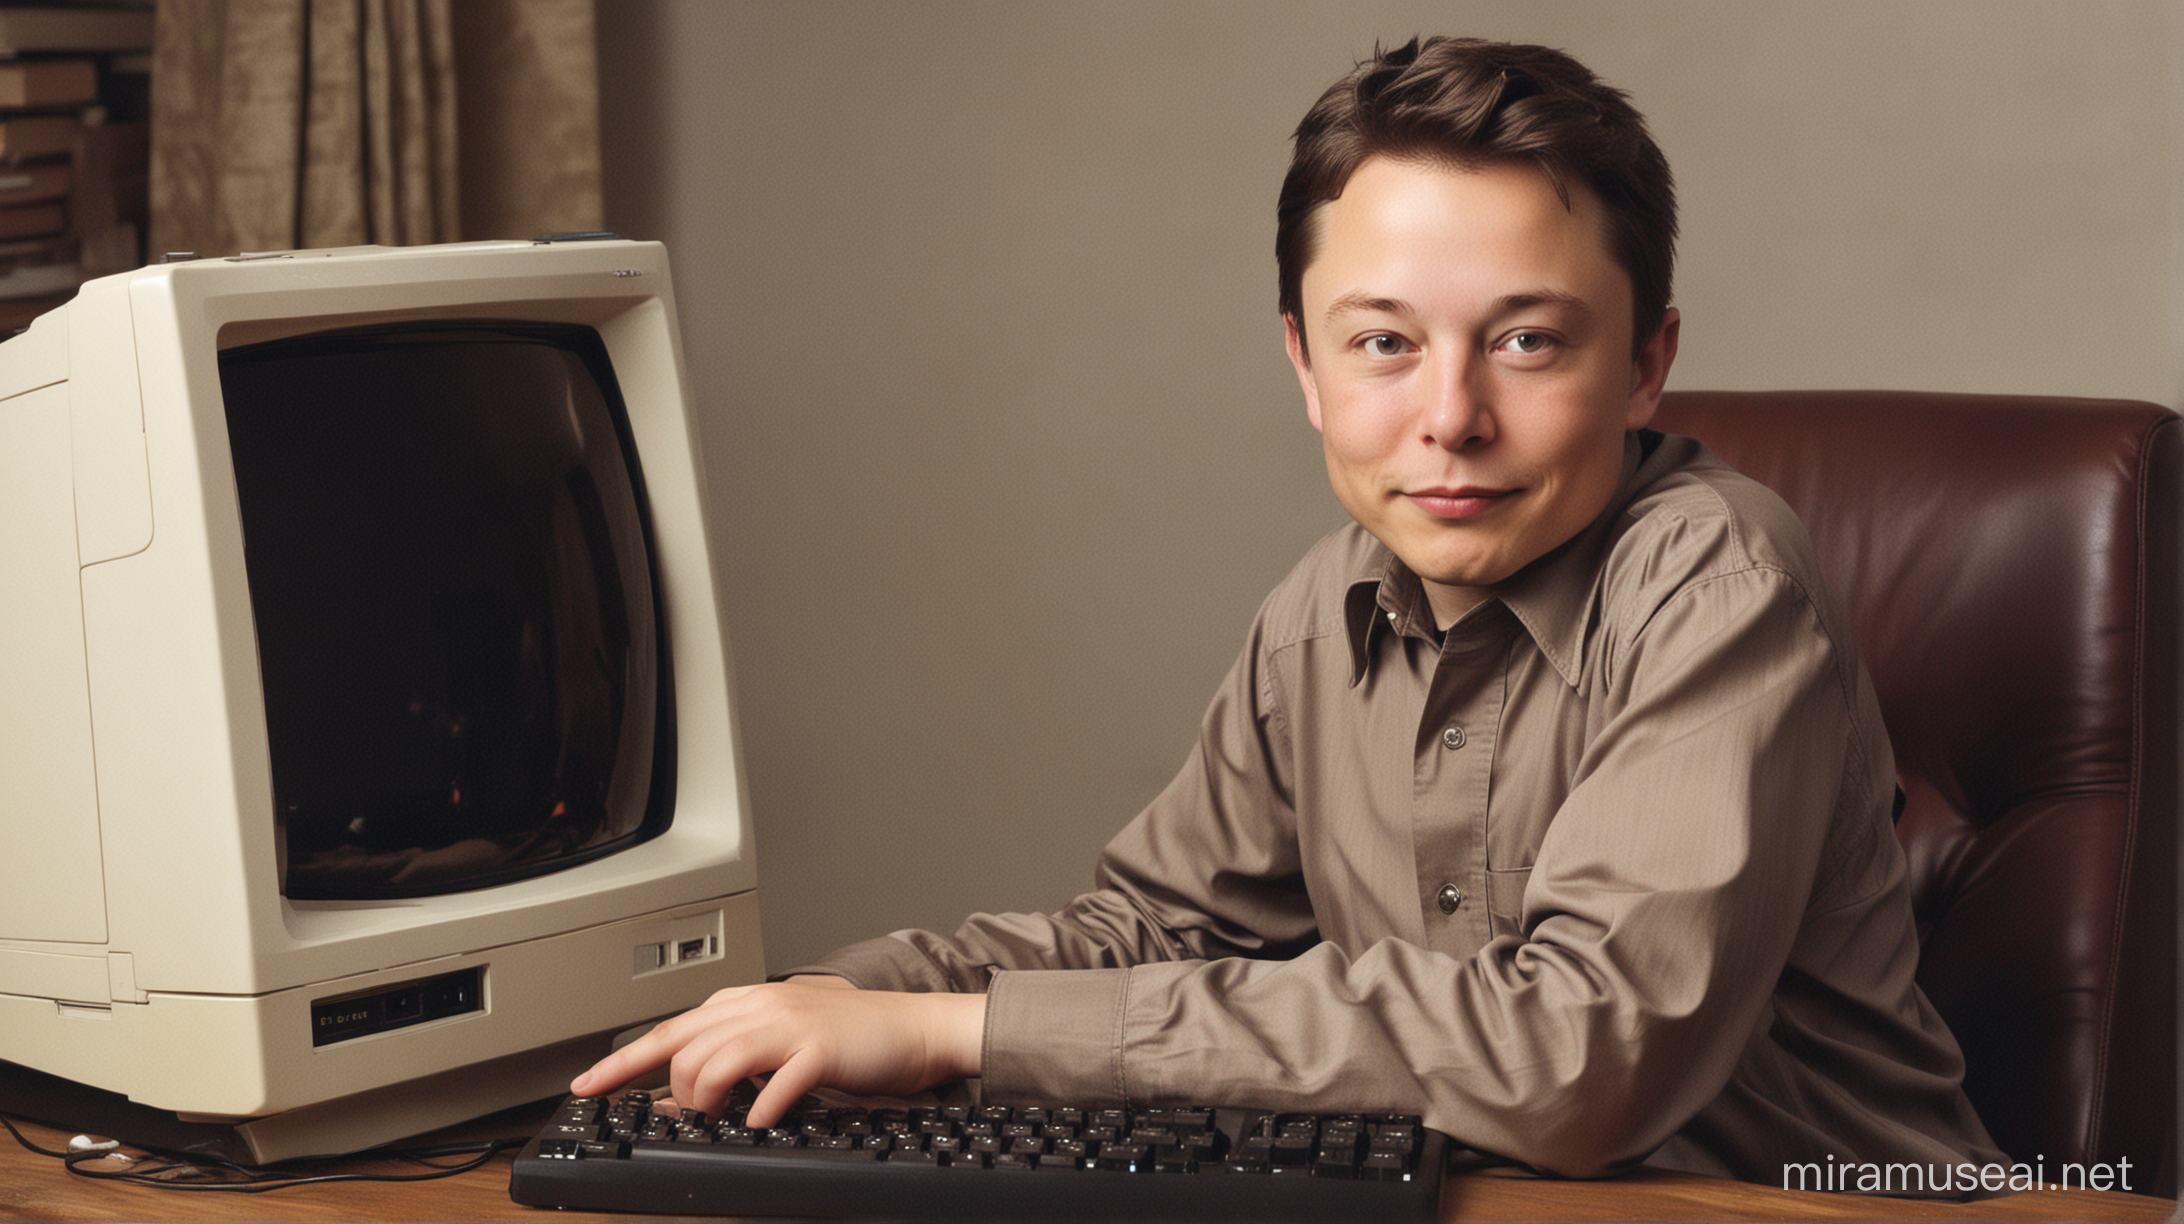 "Generate an AI image of a 10-year-old Elon Musk programming on a vintage second-hand PC. The background should have a vintage aesthetic but look attractive overall. Musk should be depicted as focused and engaged in his programming task. The image should evoke a sense of nostalgia for old technology while highlighting Musk's early interest and aptitude in programming."